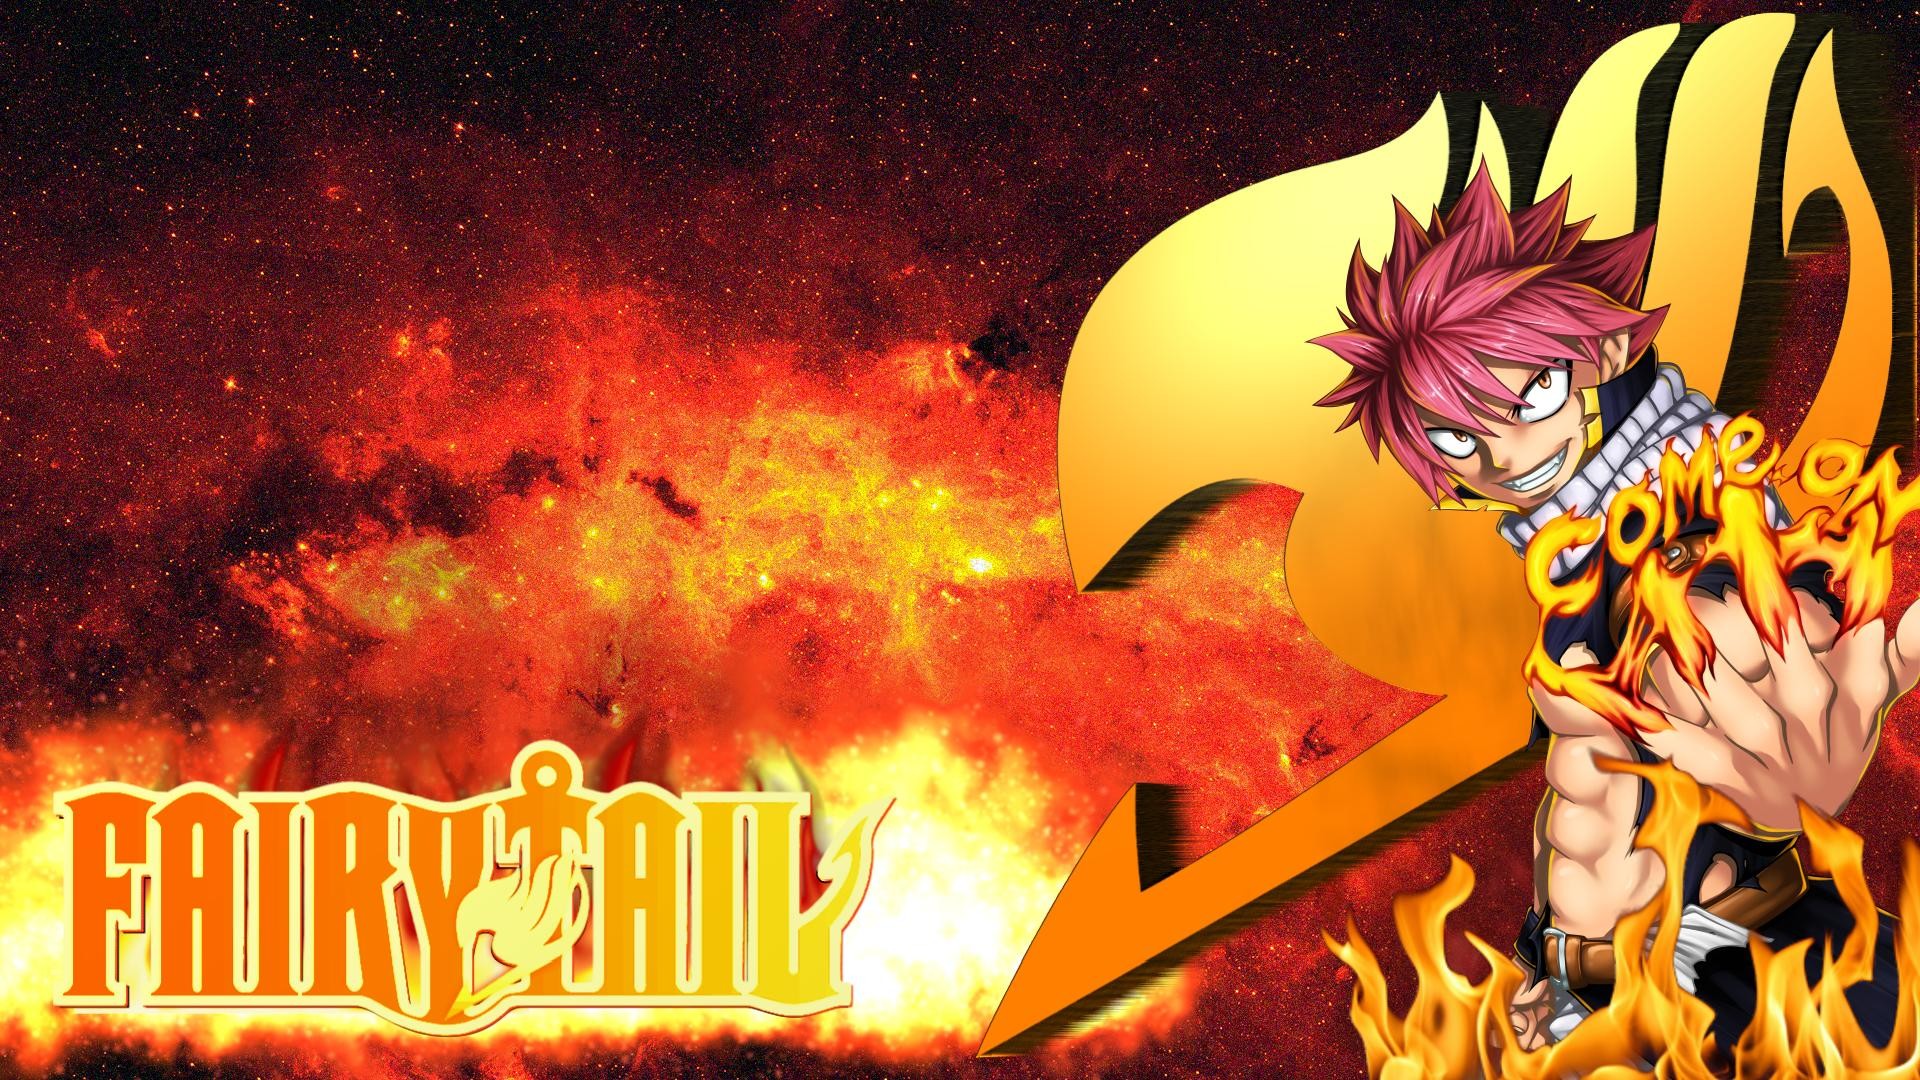 1920x1080 Fairy Tail Natsu Wallpaper For Android